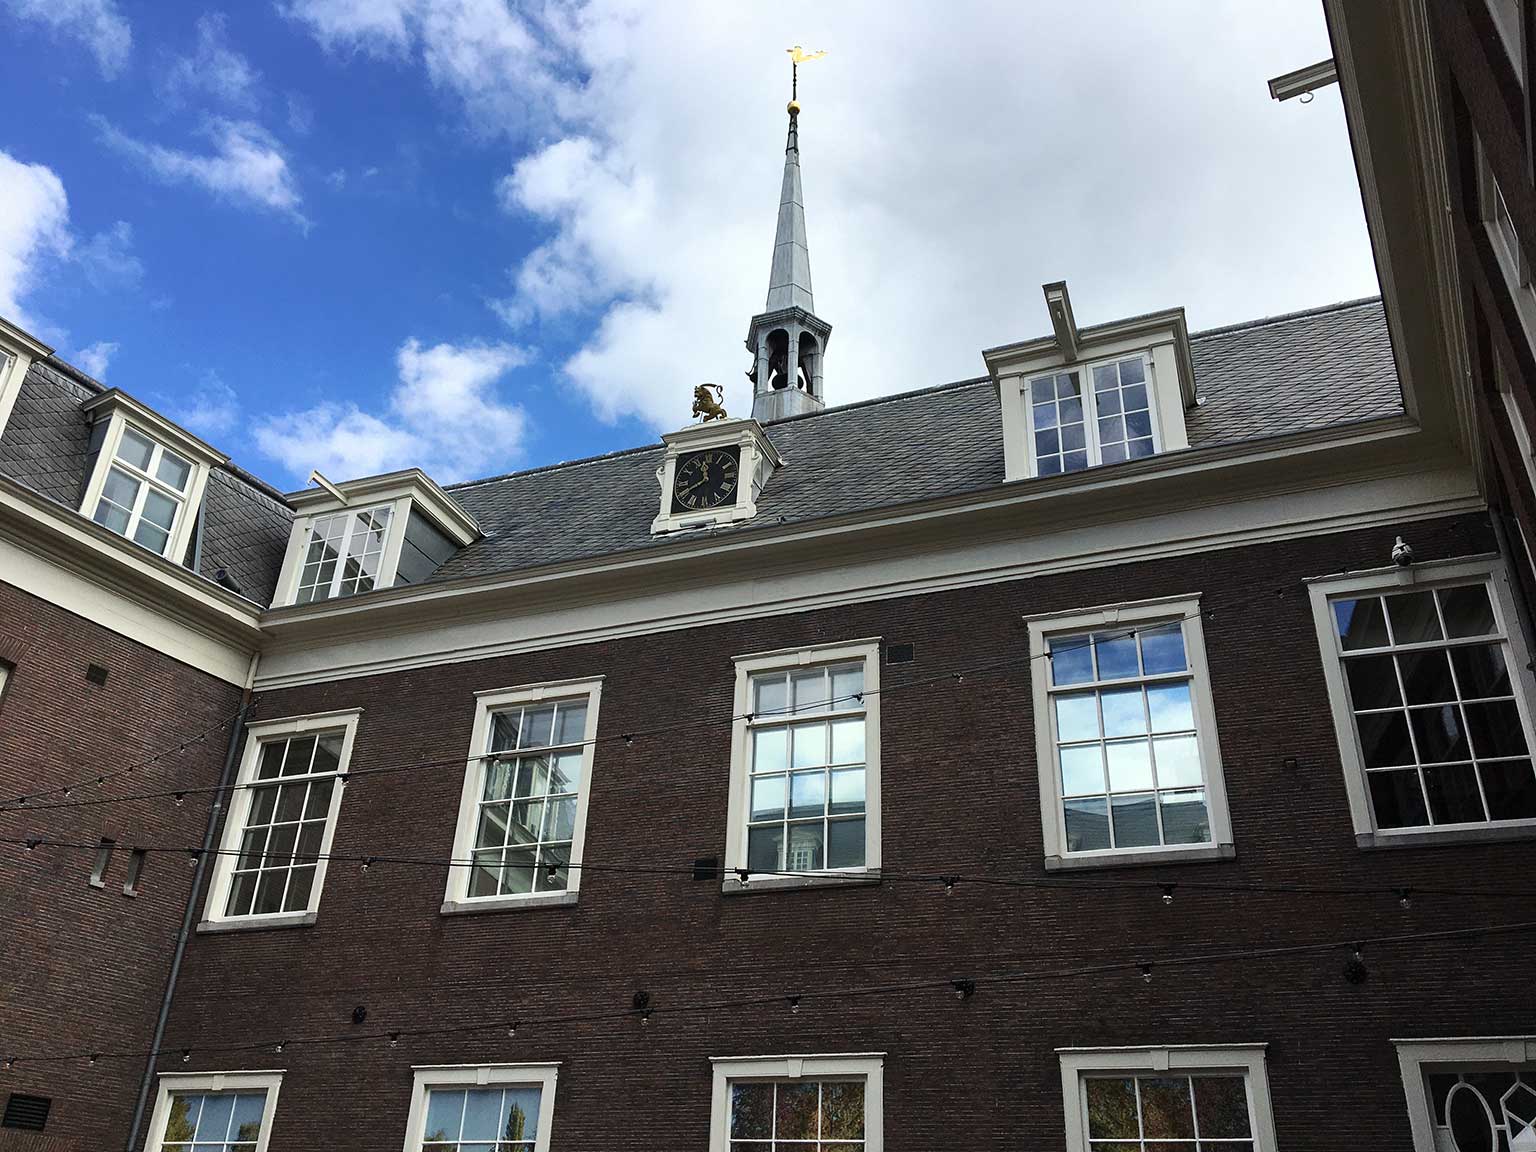 Spire of the St. Cecilia convent chapel, on the roof of The Grand, Amsterdam